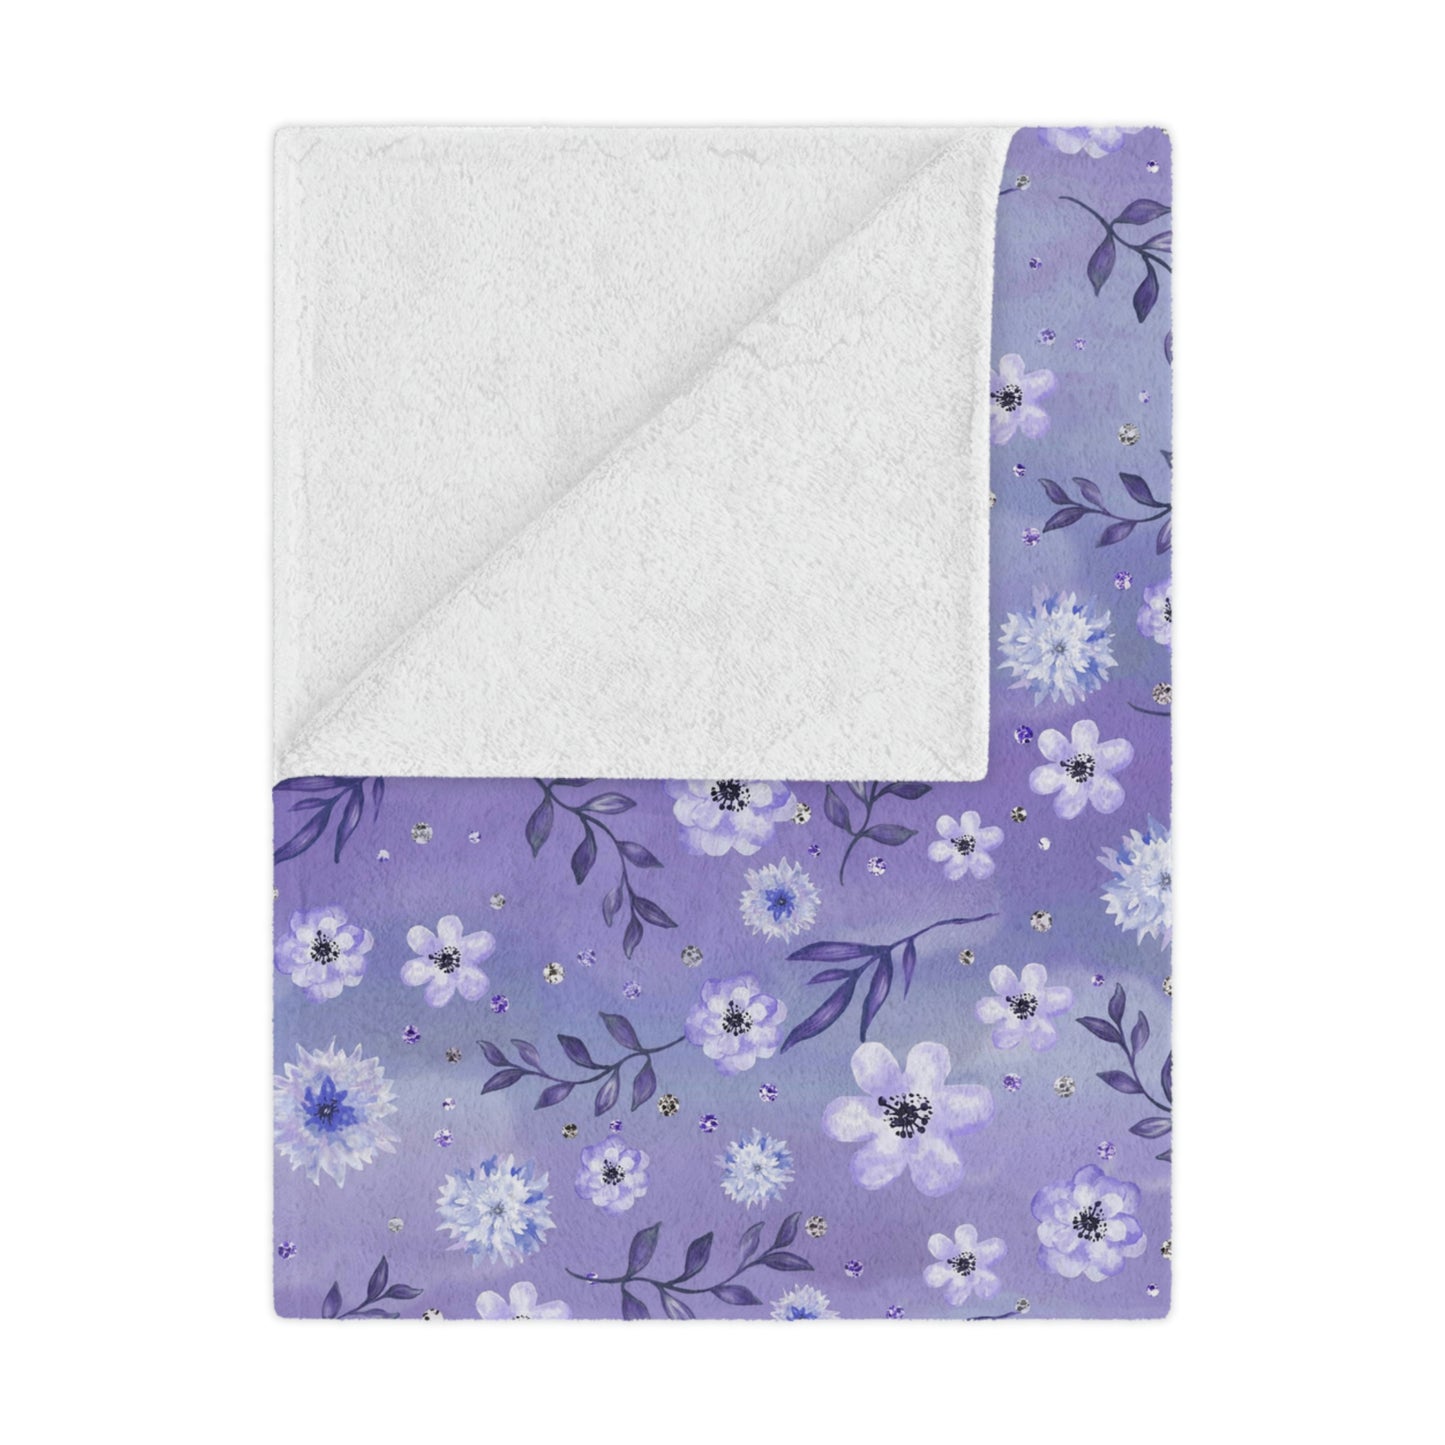 purple floral blanket lying on a bed, purple flowers on a throw blanket decorating a bedroom, purple floral plush blanket lying next to pillows on a bed